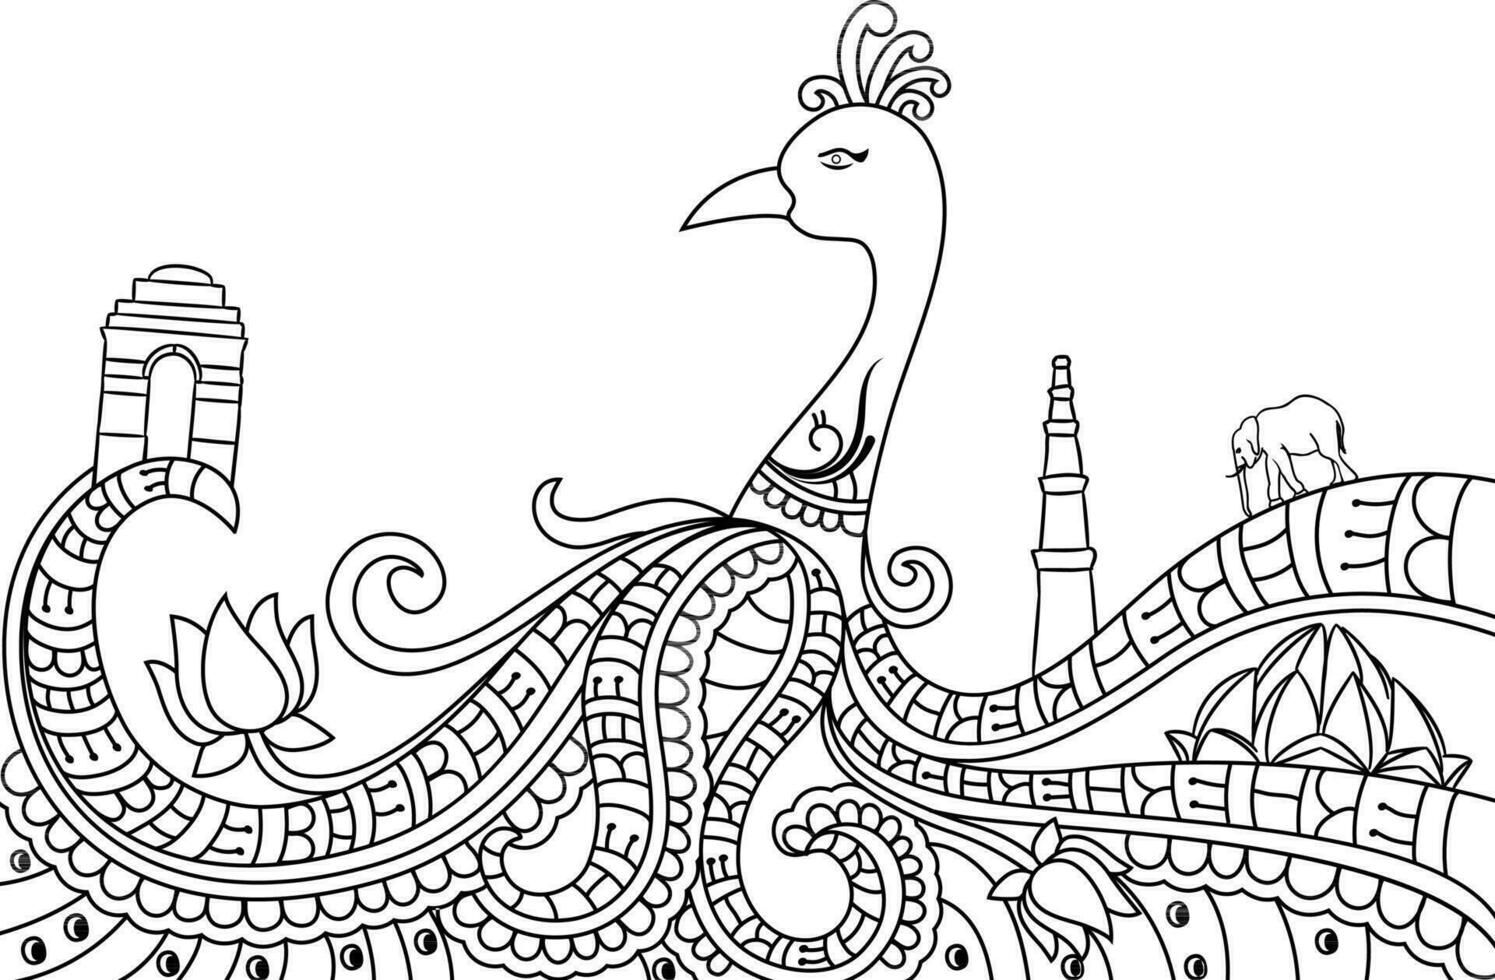 Hand drawn floral doodle peacock with Indian symbols. vector